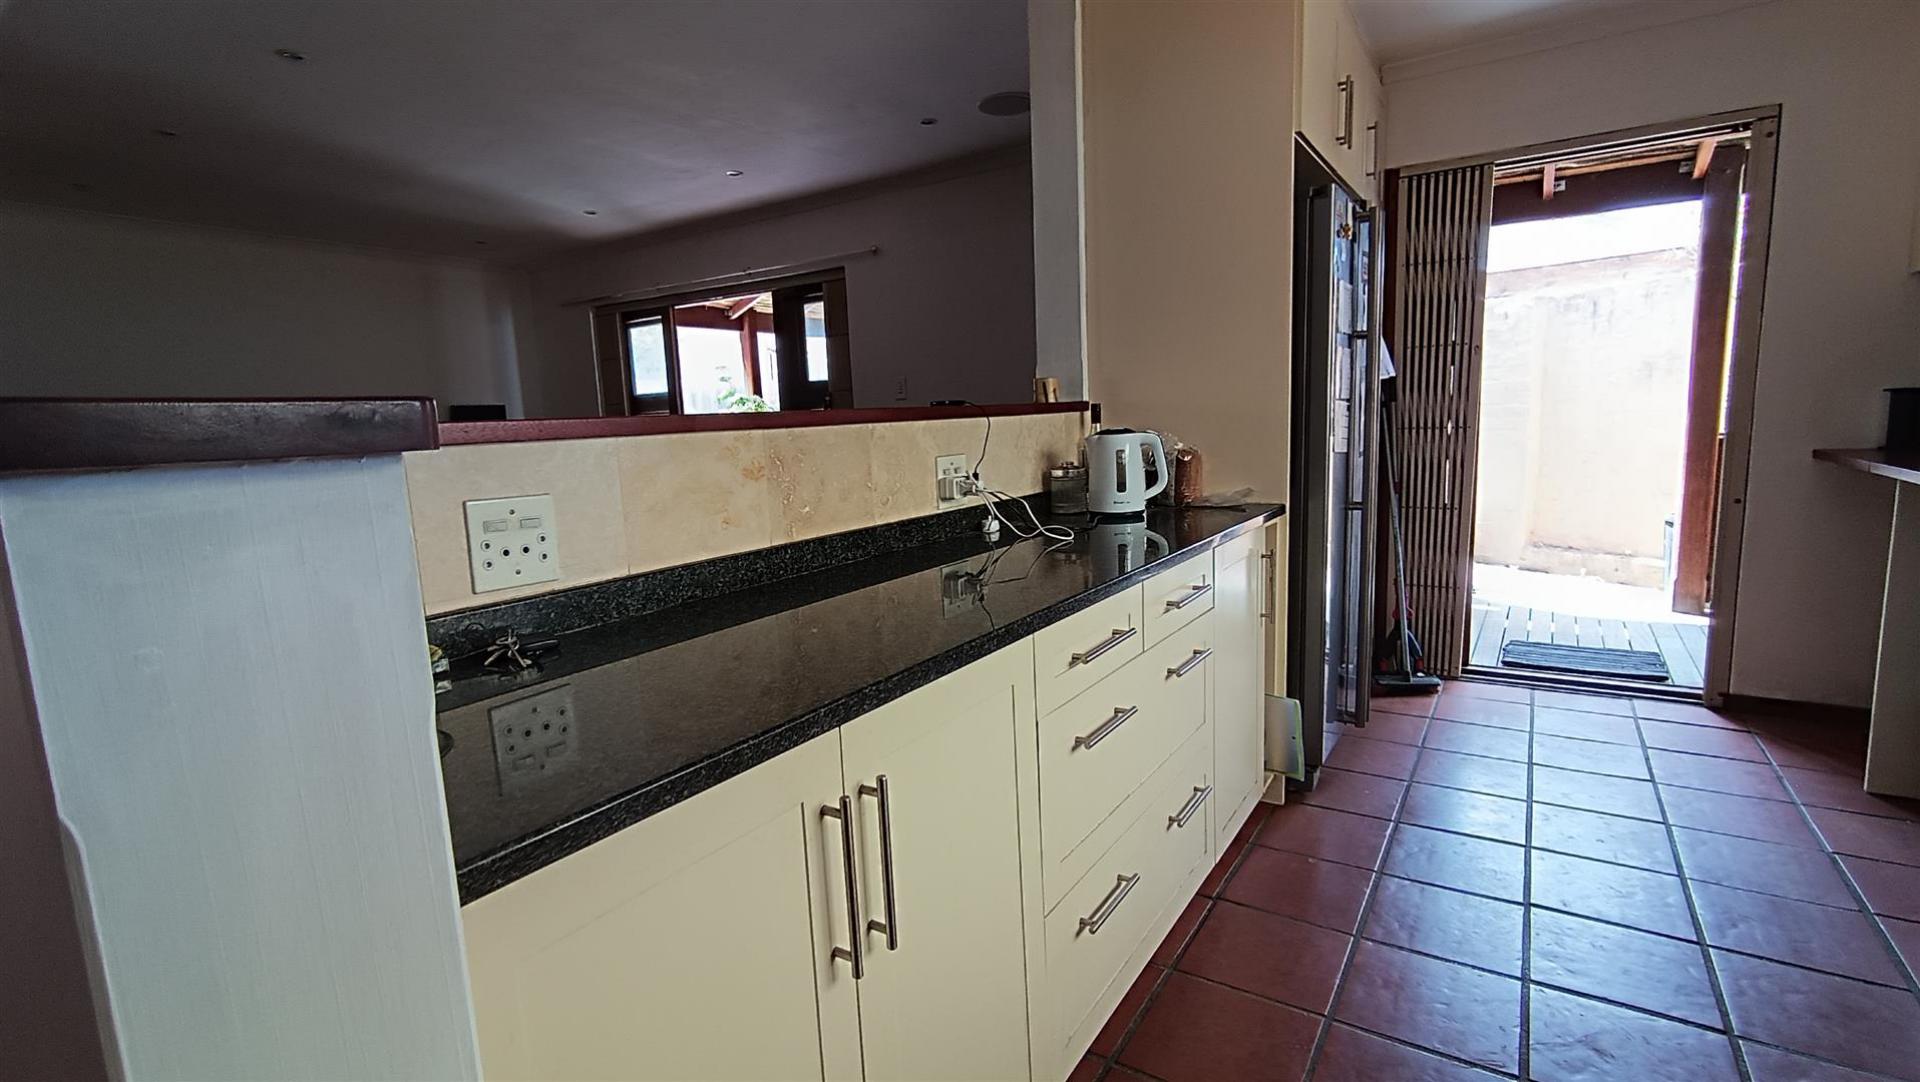 Kitchen - 14 square meters of property in Dreyersdal